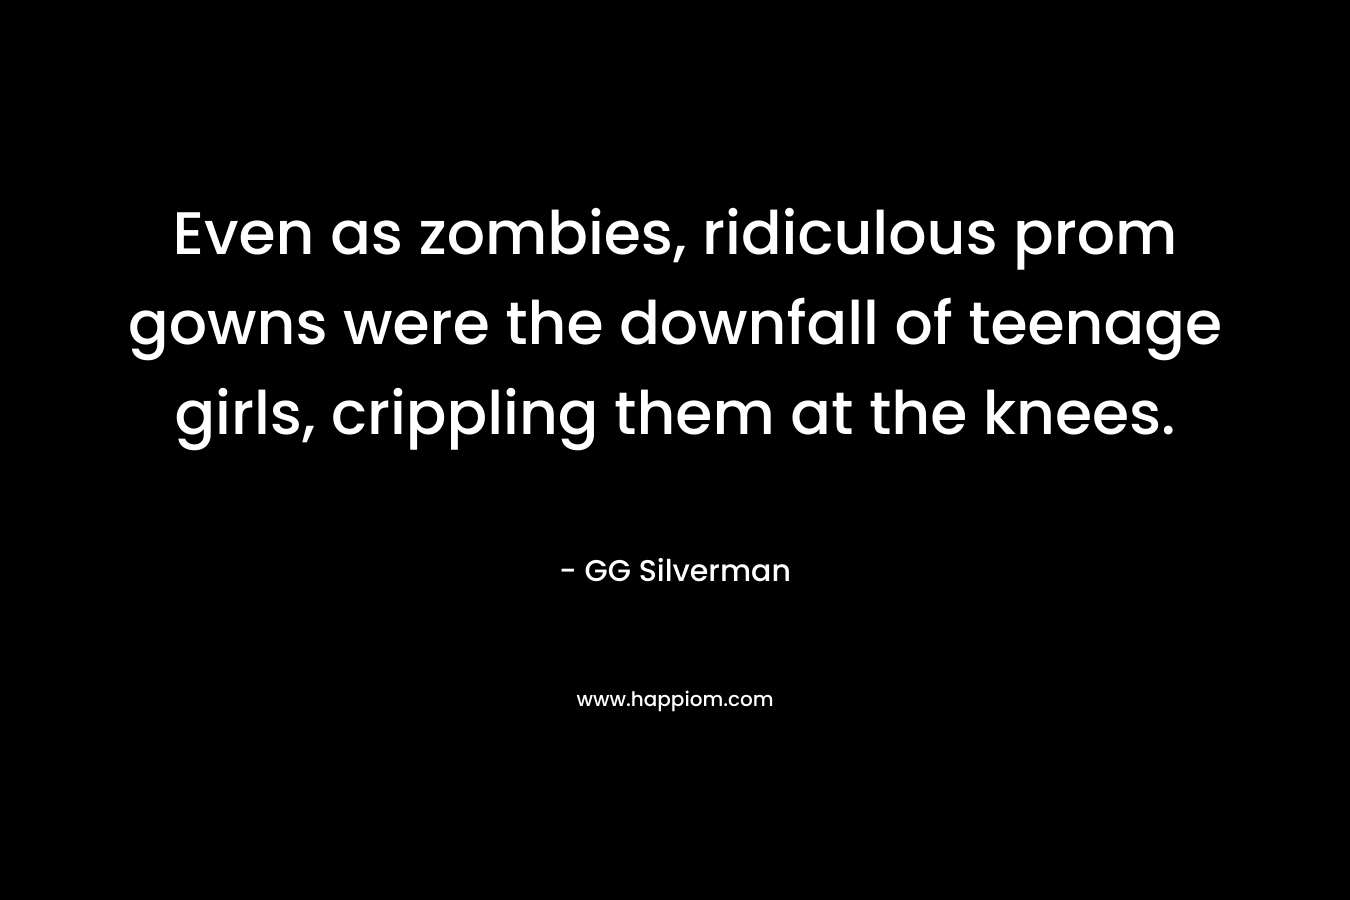 Even as zombies, ridiculous prom gowns were the downfall of teenage girls, crippling them at the knees. – GG Silverman